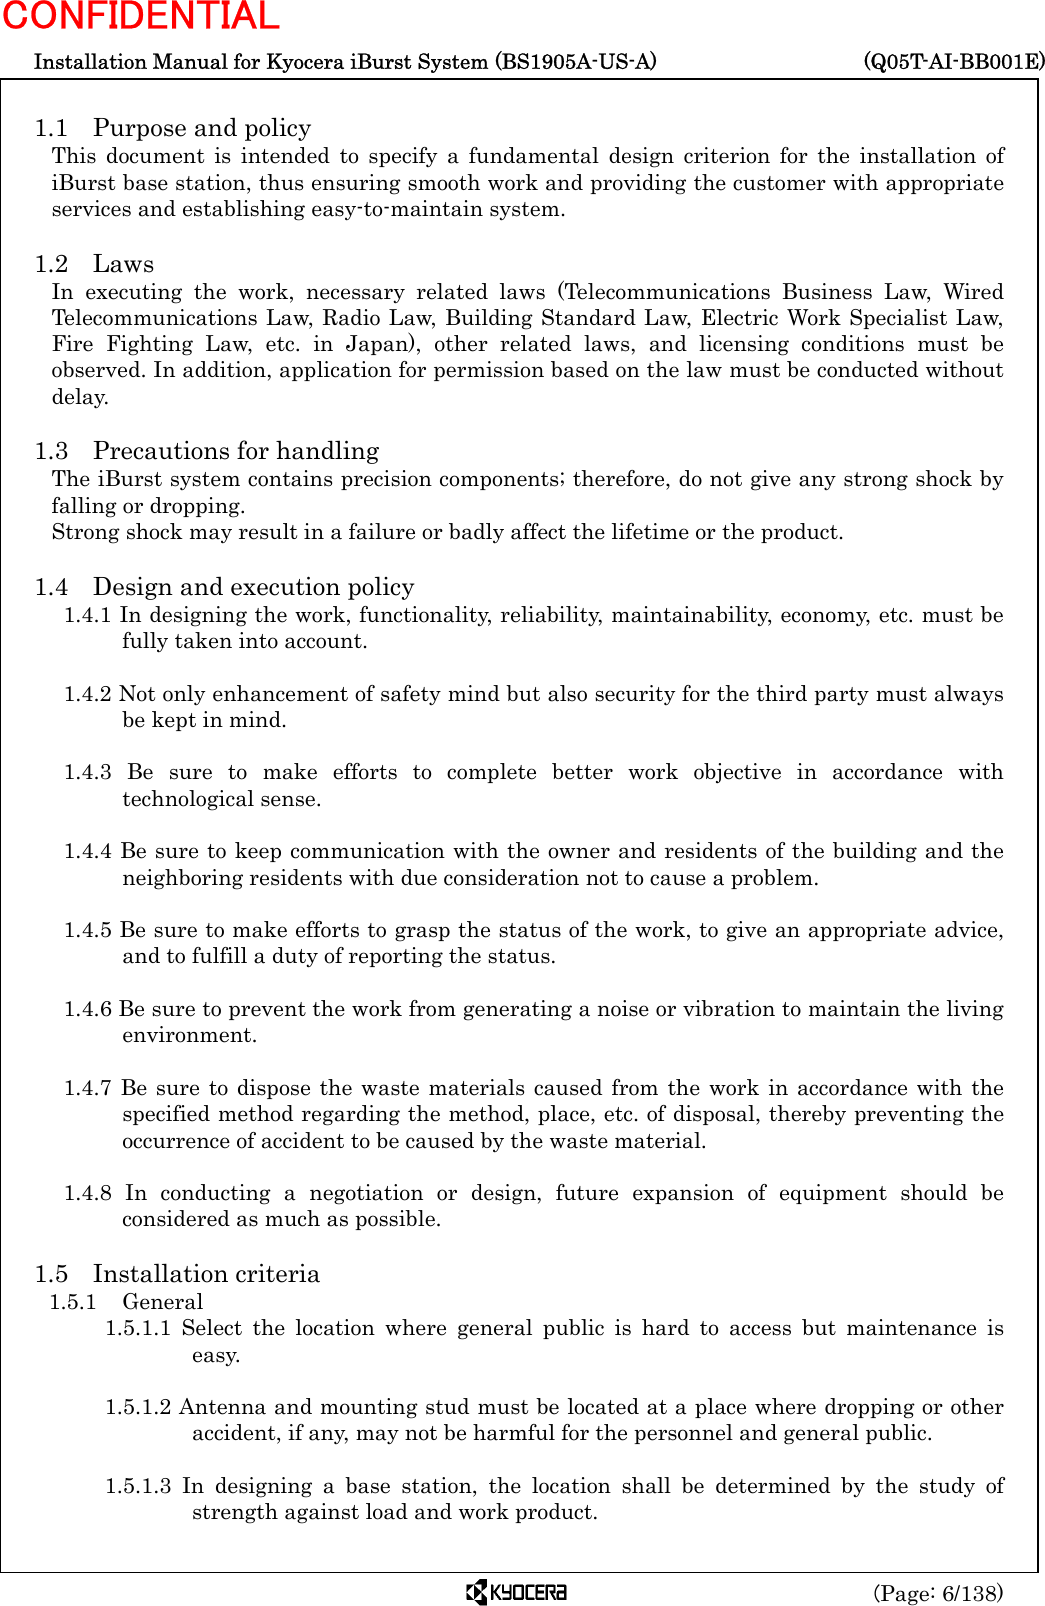  Installation Manual for Kyocera iBurst System (BS1905A-US-A)     (Q05T-AI-BB001E) (Page: 6/138) CONFIDENTIAL  1.1  Purpose and policy This document is intended to specify a fundamental design criterion for the installation of iBurst base station, thus ensuring smooth work and providing the customer with appropriate services and establishing easy-to-maintain system.  1.2 Laws In executing the work, necessary related laws (Telecommunications Business Law, Wired Telecommunications Law, Radio Law, Building Standard Law, Electric Work Specialist Law, Fire Fighting Law, etc. in Japan), other related laws, and licensing conditions must be observed. In addition, application for permission based on the law must be conducted without delay.  1.3  Precautions for handling The iBurst system contains precision components; therefore, do not give any strong shock by falling or dropping. Strong shock may result in a failure or badly affect the lifetime or the product.  1.4  Design and execution policy 1.4.1 In designing the work, functionality, reliability, maintainability, economy, etc. must be fully taken into account.  1.4.2 Not only enhancement of safety mind but also security for the third party must always be kept in mind.  1.4.3 Be sure to make efforts to complete better work objective in accordance with technological sense.  1.4.4 Be sure to keep communication with the owner and residents of the building and the neighboring residents with due consideration not to cause a problem.  1.4.5 Be sure to make efforts to grasp the status of the work, to give an appropriate advice, and to fulfill a duty of reporting the status.  1.4.6 Be sure to prevent the work from generating a noise or vibration to maintain the living environment.  1.4.7 Be sure to dispose the waste materials caused from the work in accordance with the specified method regarding the method, place, etc. of disposal, thereby preventing the occurrence of accident to be caused by the waste material.  1.4.8 In conducting a negotiation or design, future expansion of equipment should be considered as much as possible.  1.5 Installation criteria 1.5.1 General 1.5.1.1 Select the location where general public is hard to access but maintenance is easy.  1.5.1.2 Antenna and mounting stud must be located at a place where dropping or other accident, if any, may not be harmful for the personnel and general public.  1.5.1.3 In designing a base station, the location shall be determined by the study of strength against load and work product.  